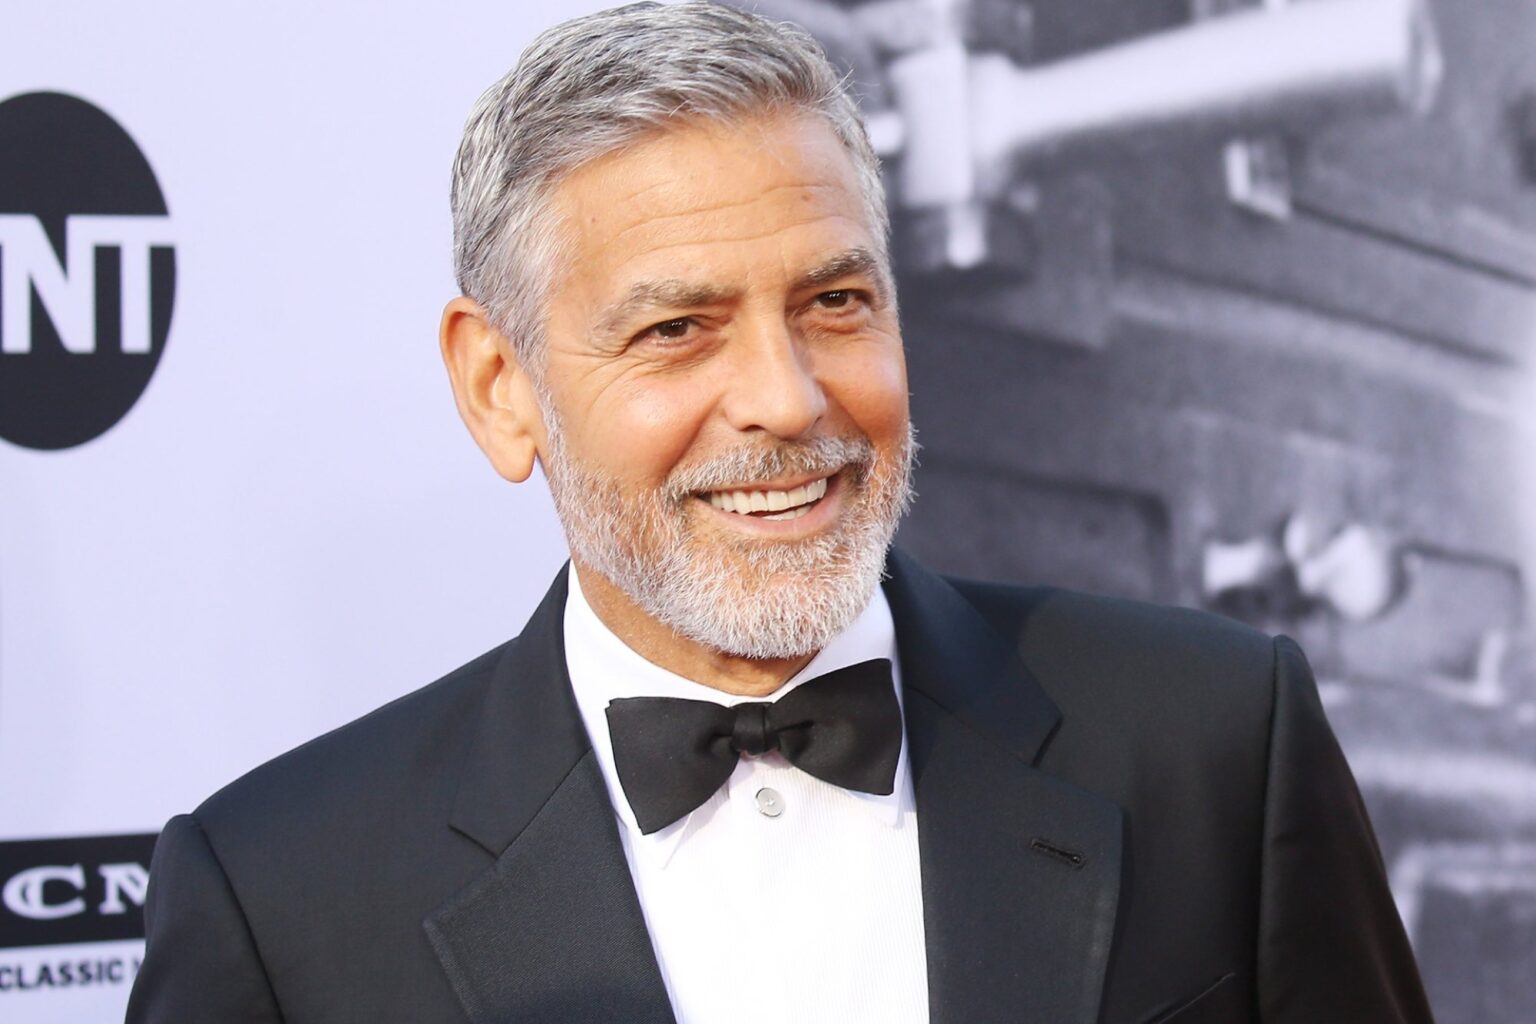 George Clooney admits he was a terrible Batman. Will the actor redeem himself with a cameo in the upcoming ‘Flash’ movie?